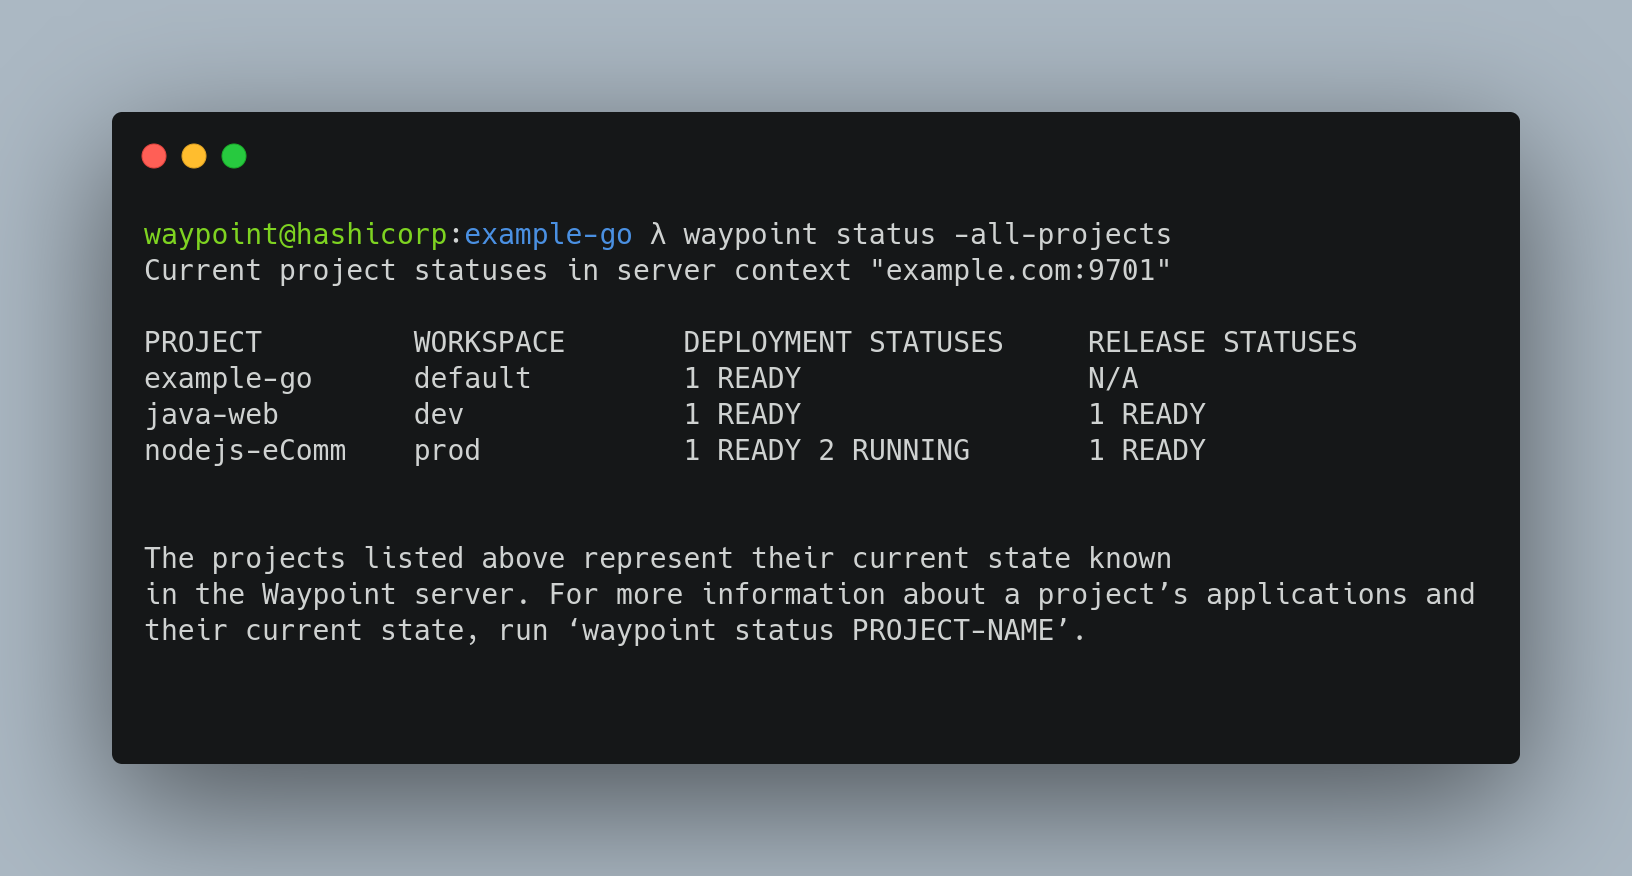 Waypoint status for all projects